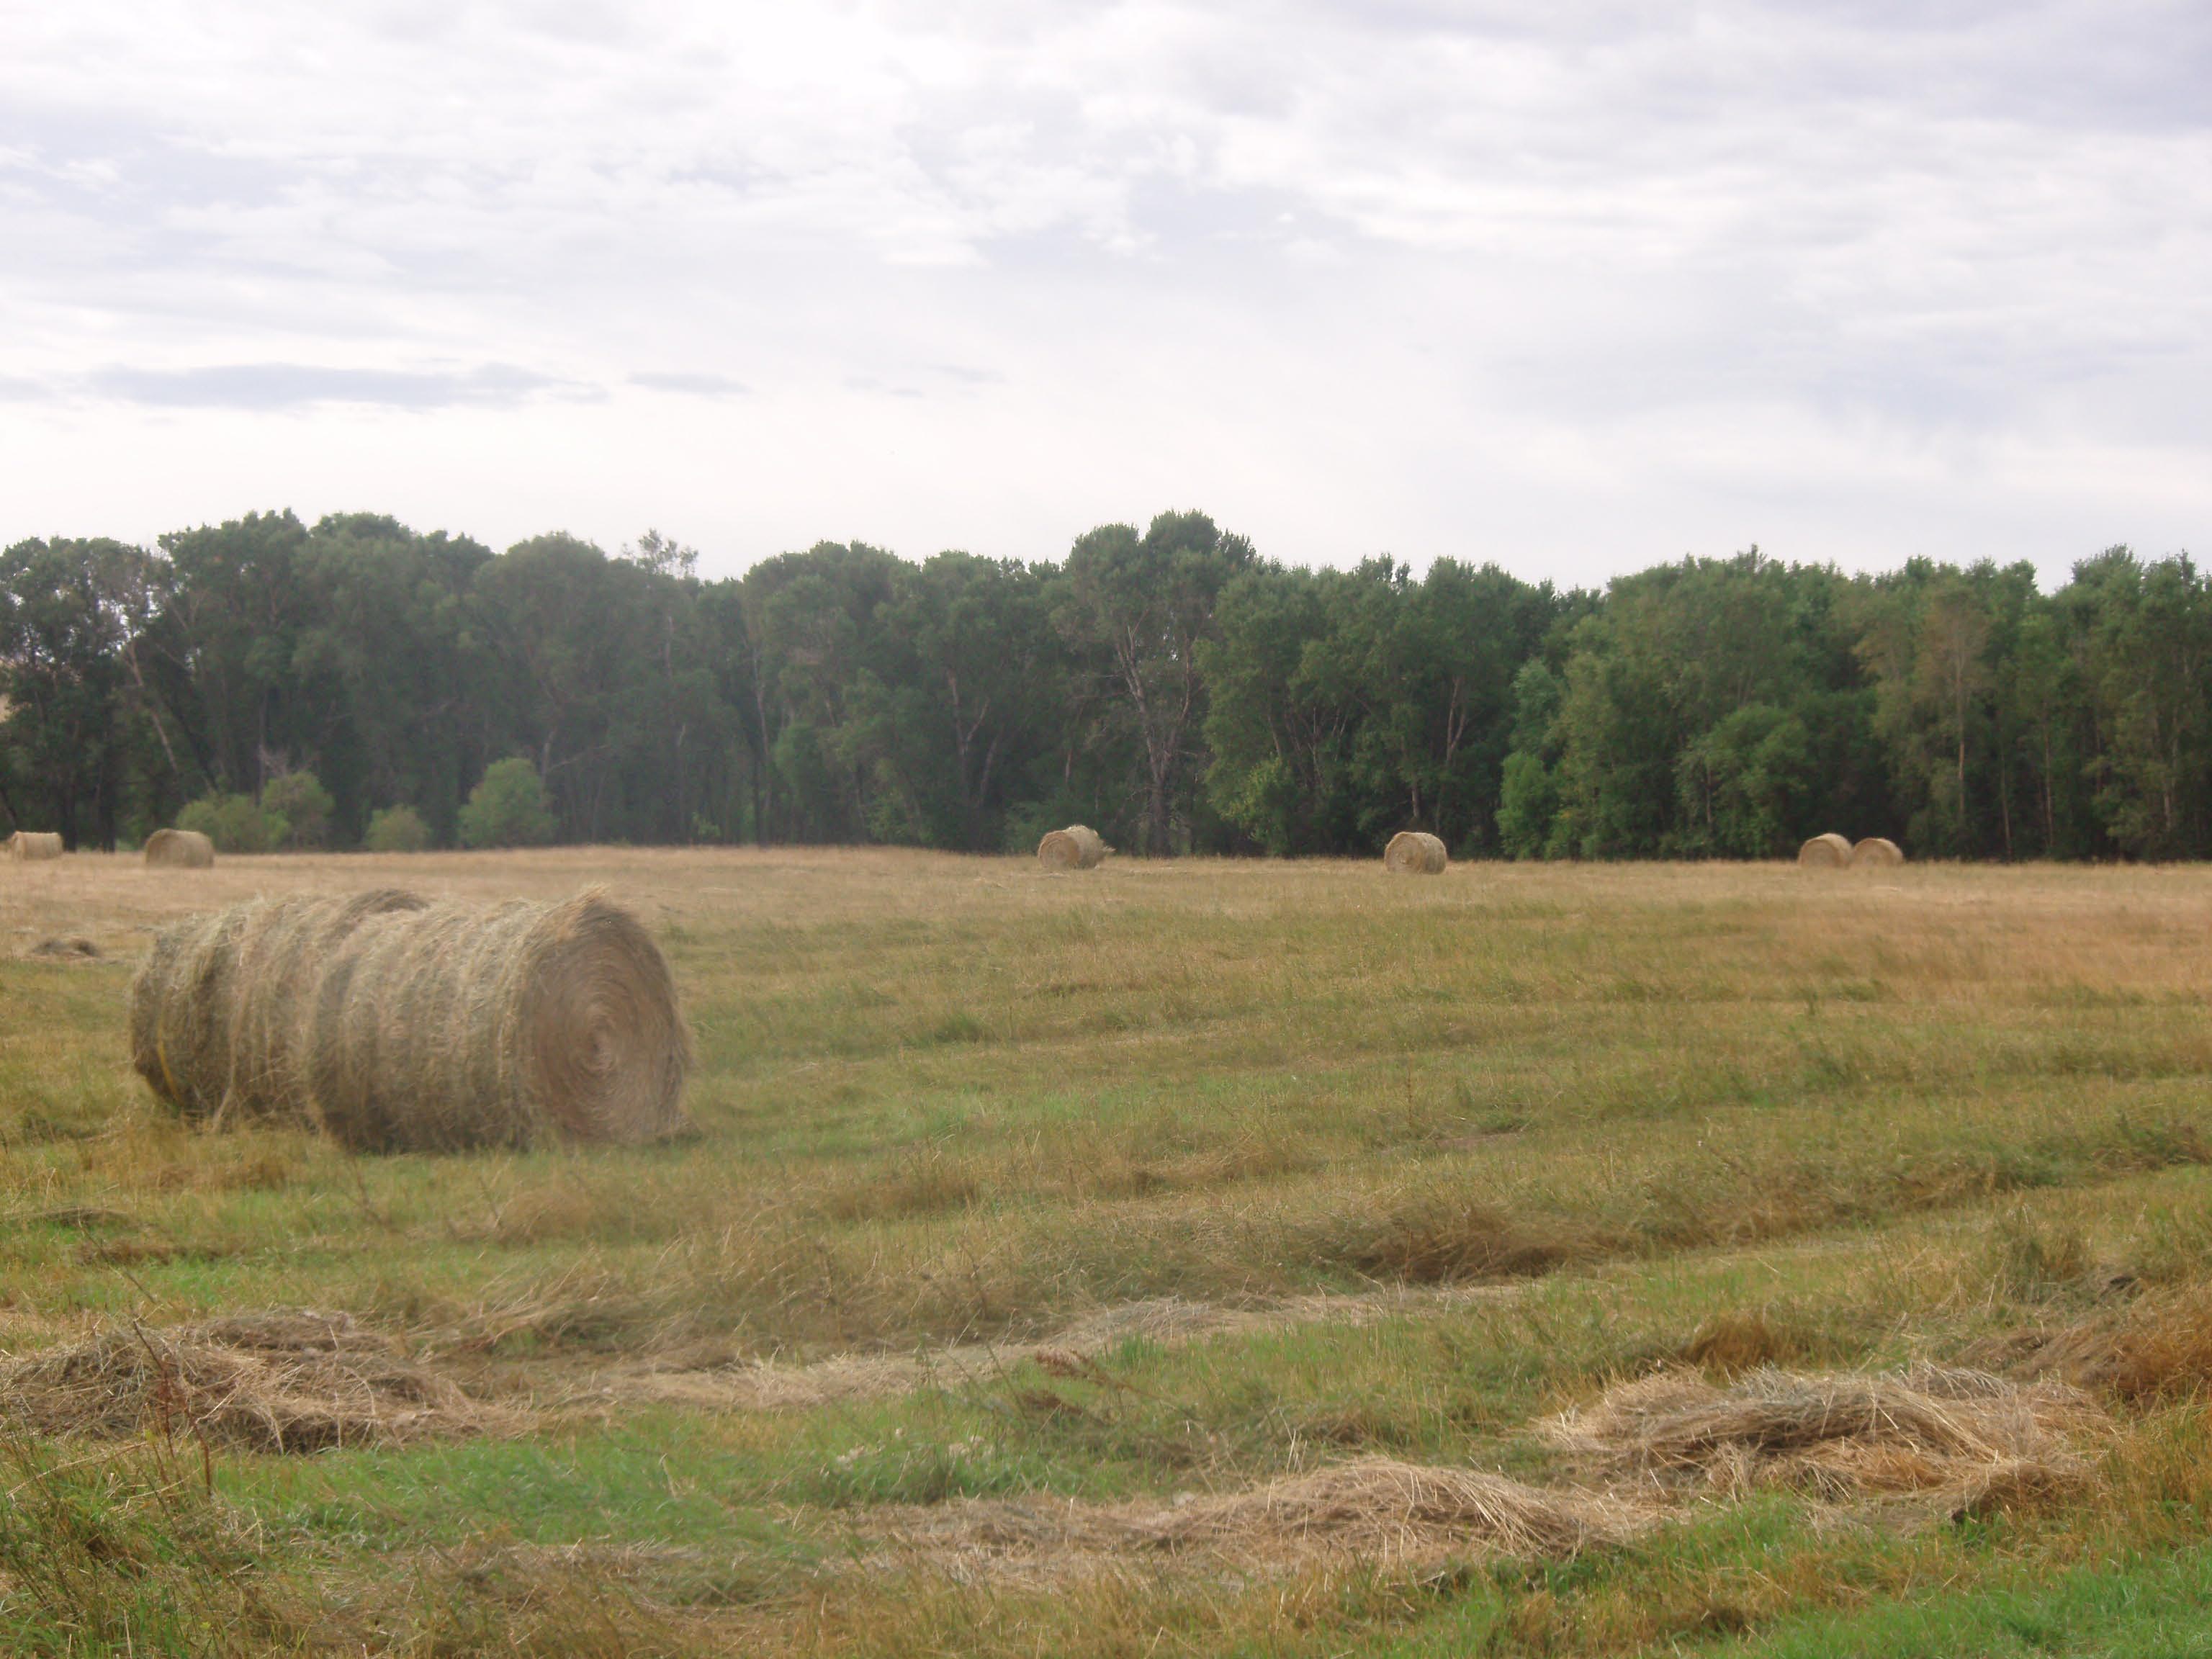 Derrell Peel Reviews the Latest Wheat Pasture and Hay Stock Conditions Based on USDA Reports